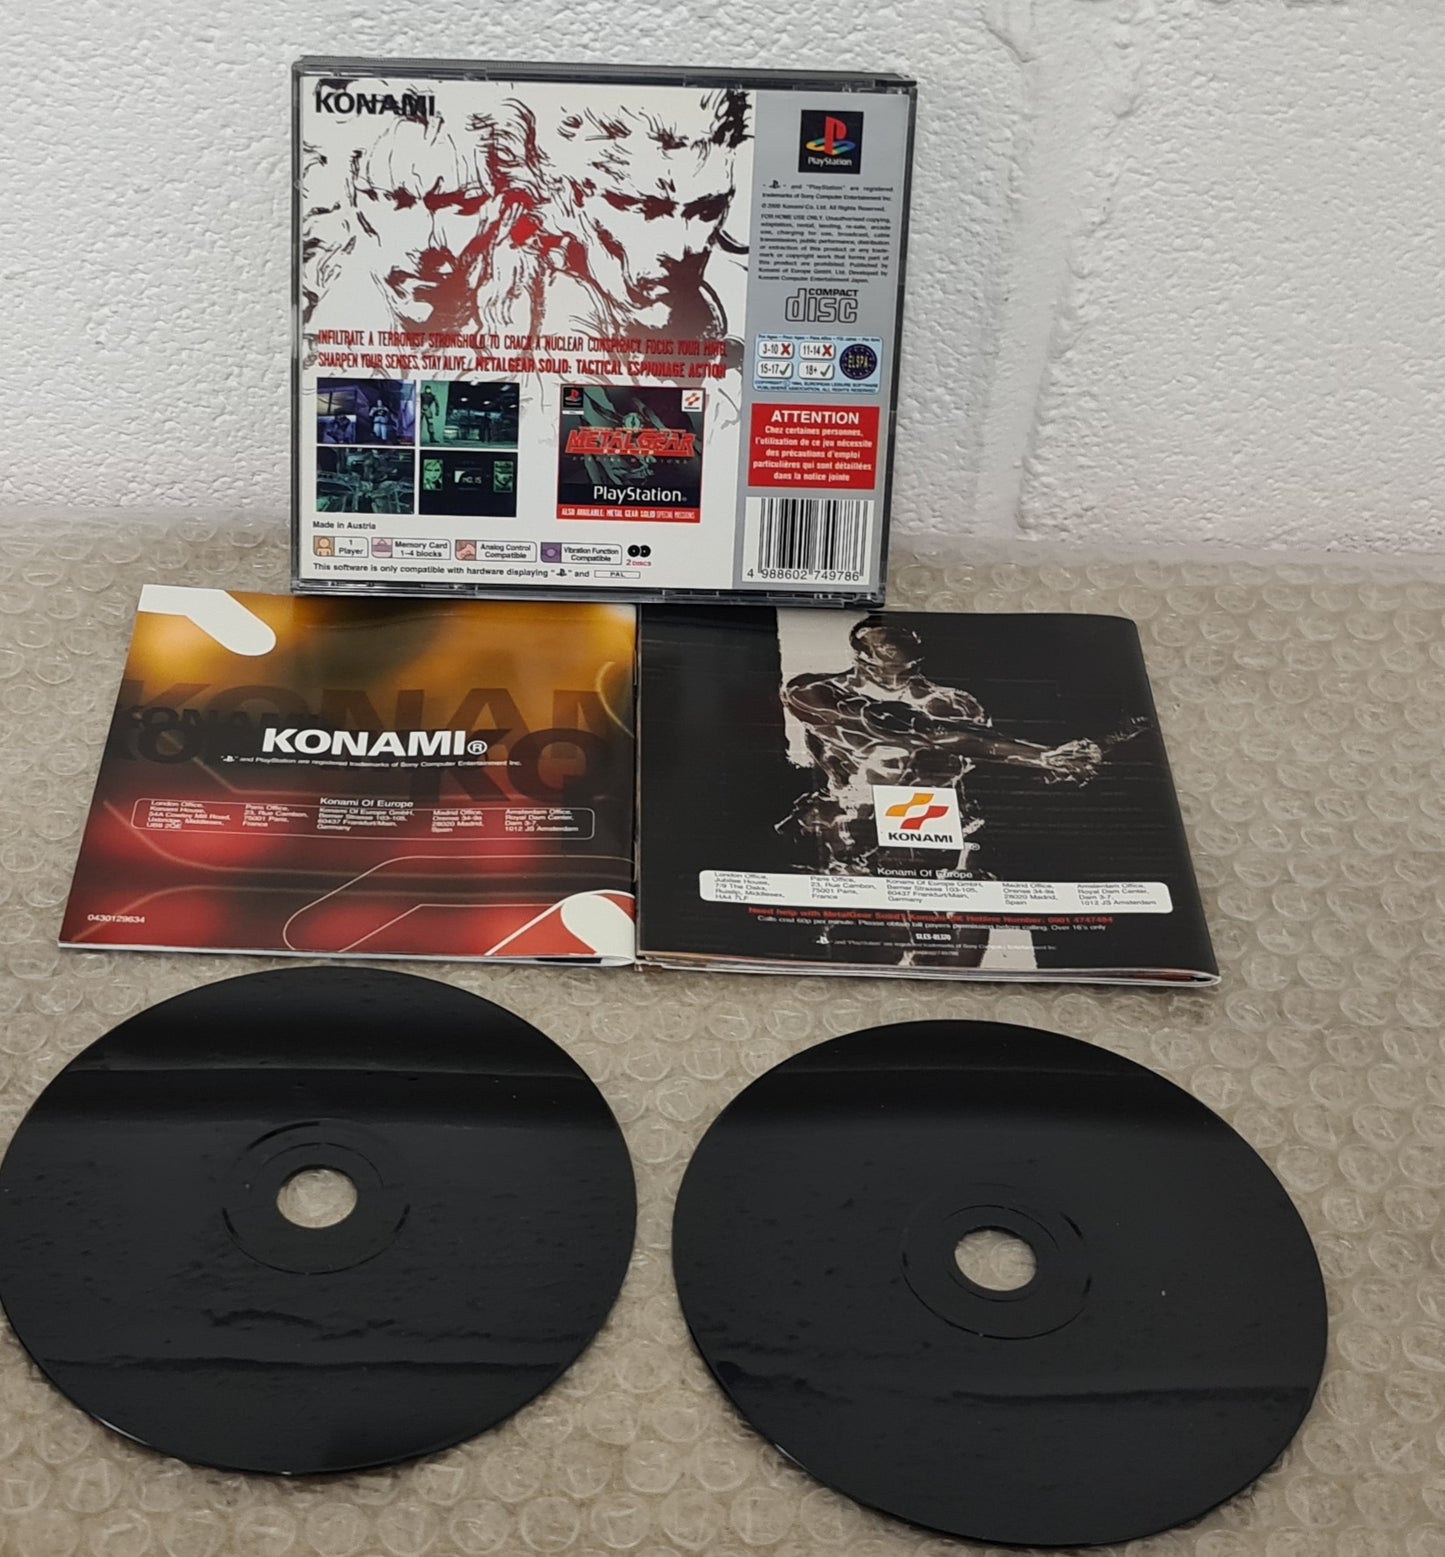 Metal Gear Solid Platinum Sony Playstation 1 (PS1) Game